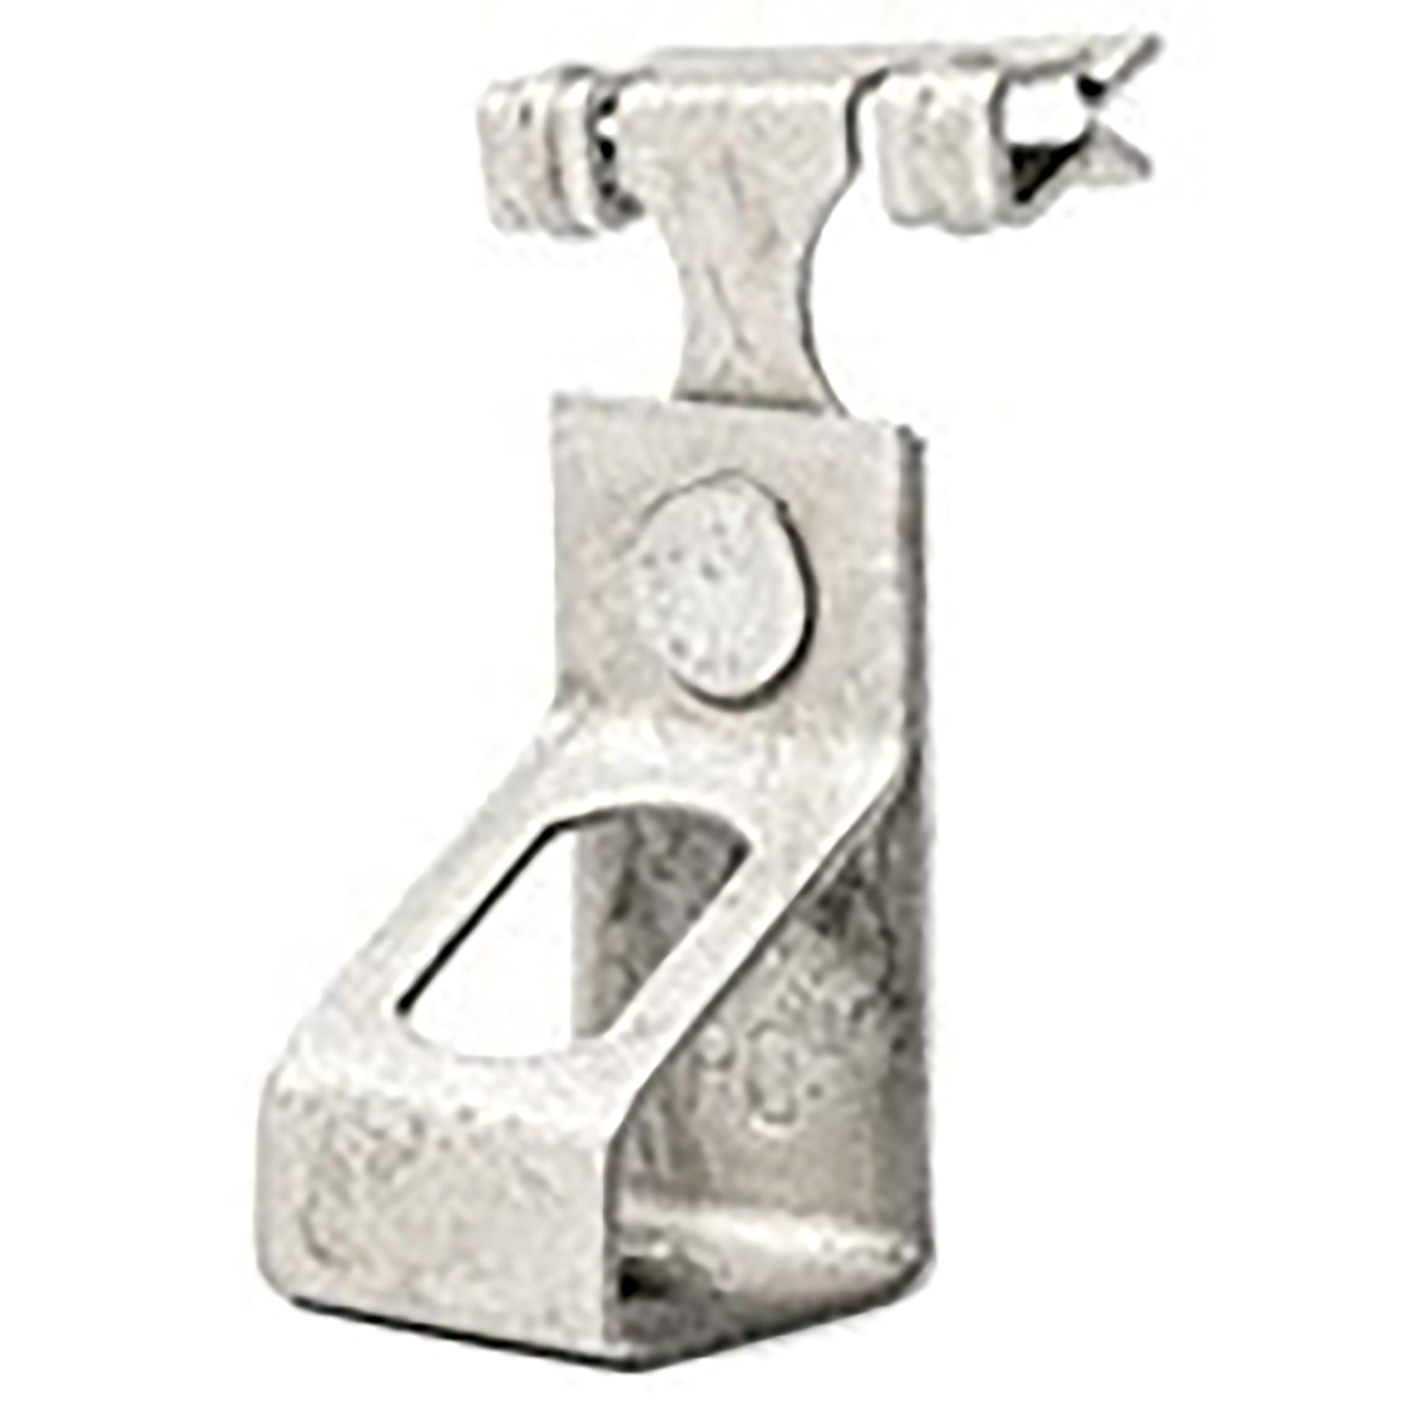 Beam Clamp I Profile M6 x 2-3mm Thickness